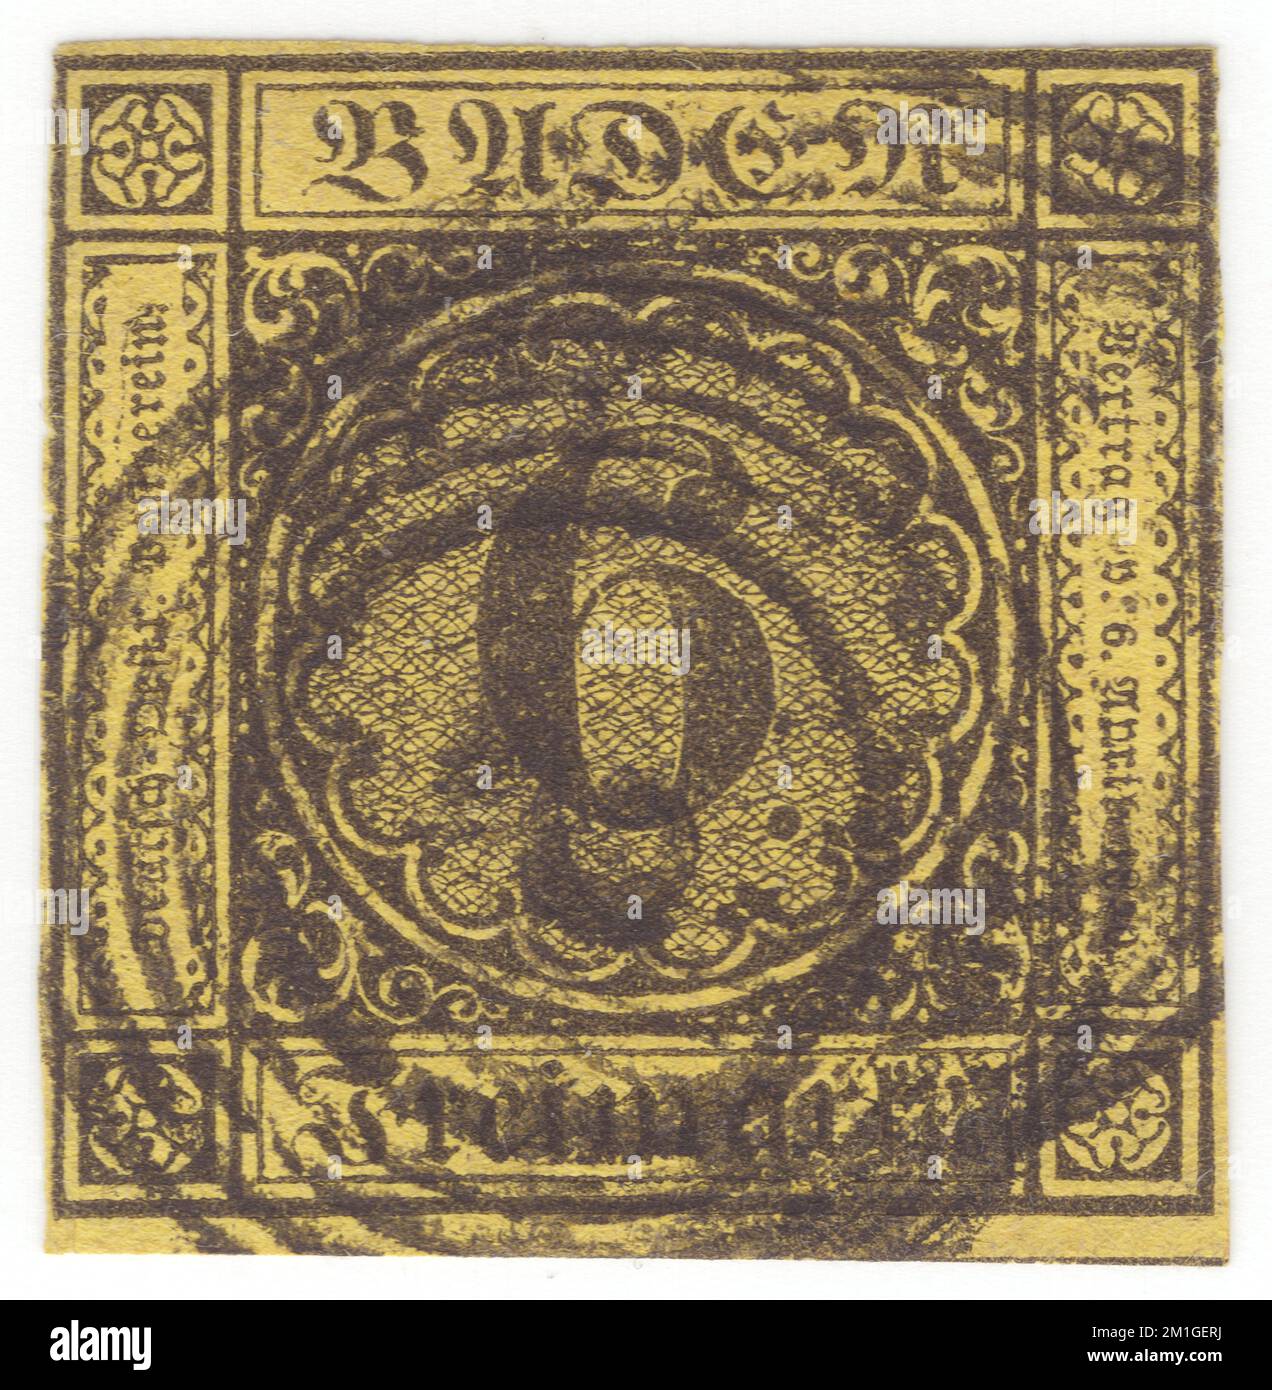 BADEN — 1851: 6 kreuzer black on yellow-green postage stamp showing numeral and ornament. Baden was one of the German states in the south-west of Germany. Grand Duchy, capital — Karlsruhe (principal city). Baden was a member of the German Confederation. In 1870 it became part of the German Empire. 60 Kreuzer = 1 Gulden Stock Photo